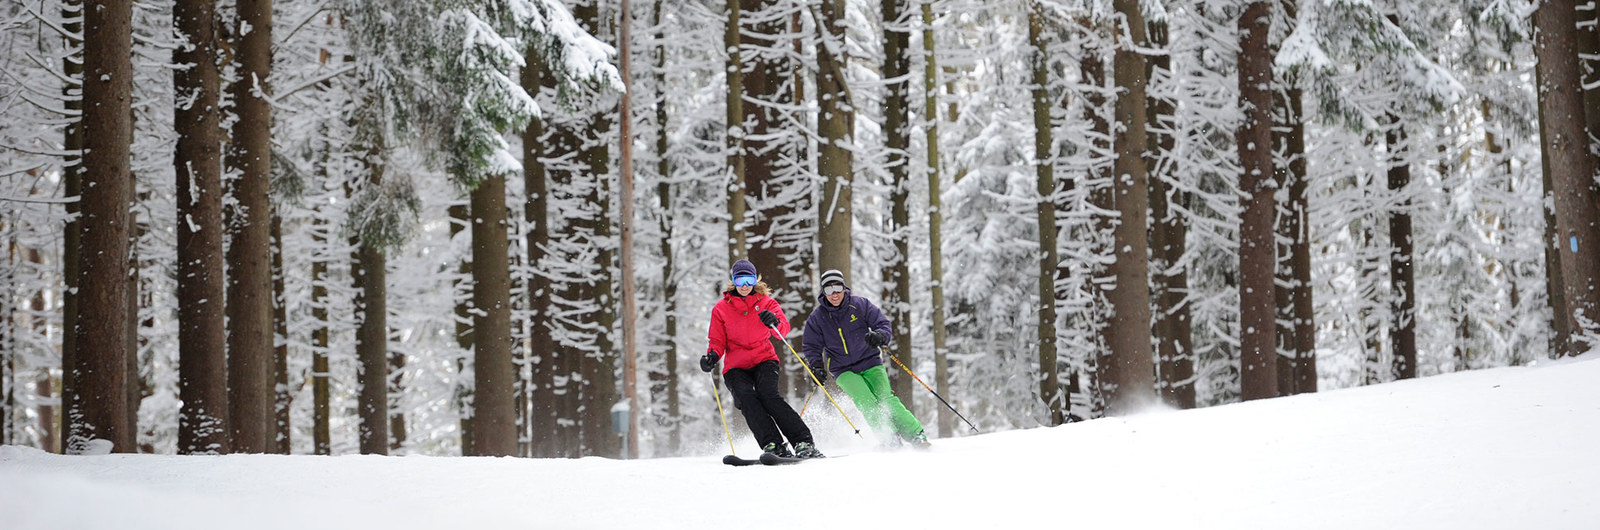 Couple skiing together on trail with snow covered trees